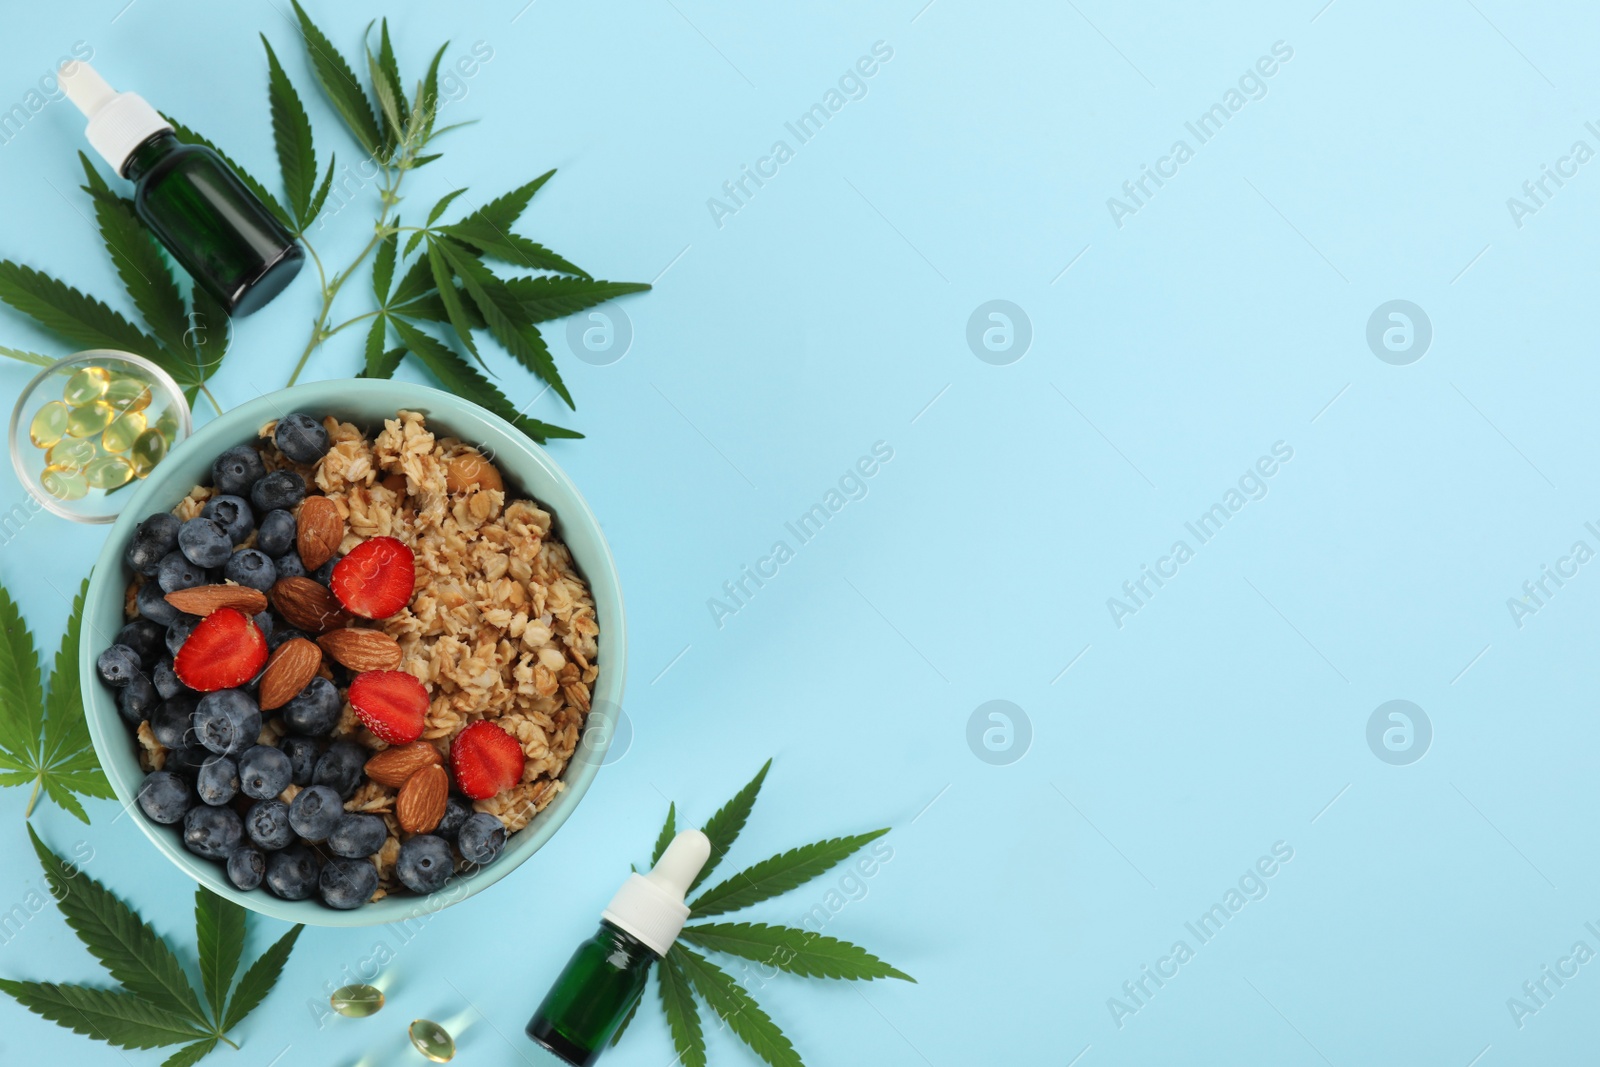 Photo of CBD oil, THC tincture, oatmeal bowl and hemp leaves on light blue background, flat lay. Space for text